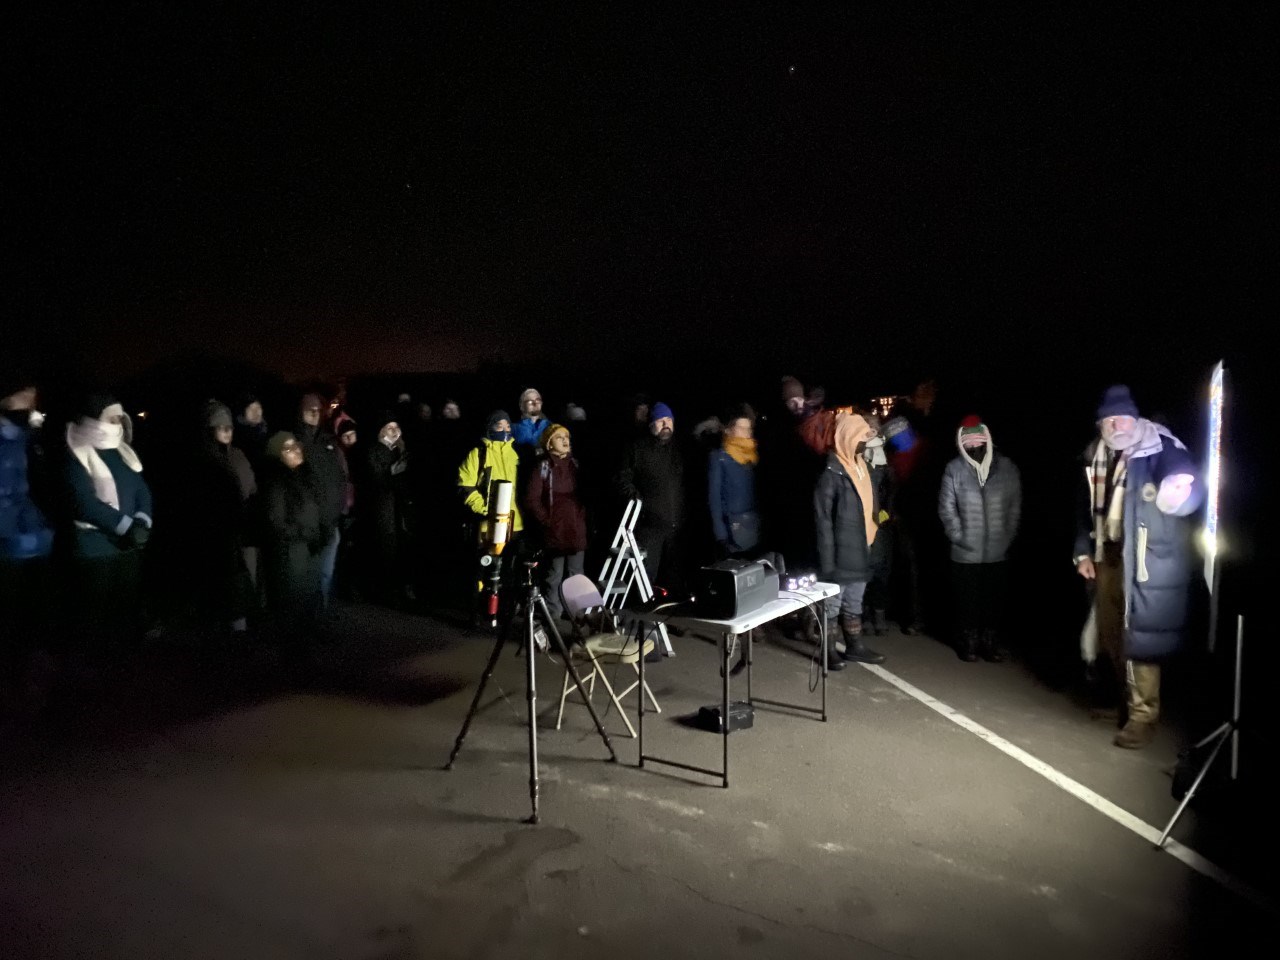 A group of visitors gather around a projector screen outside under the stars.